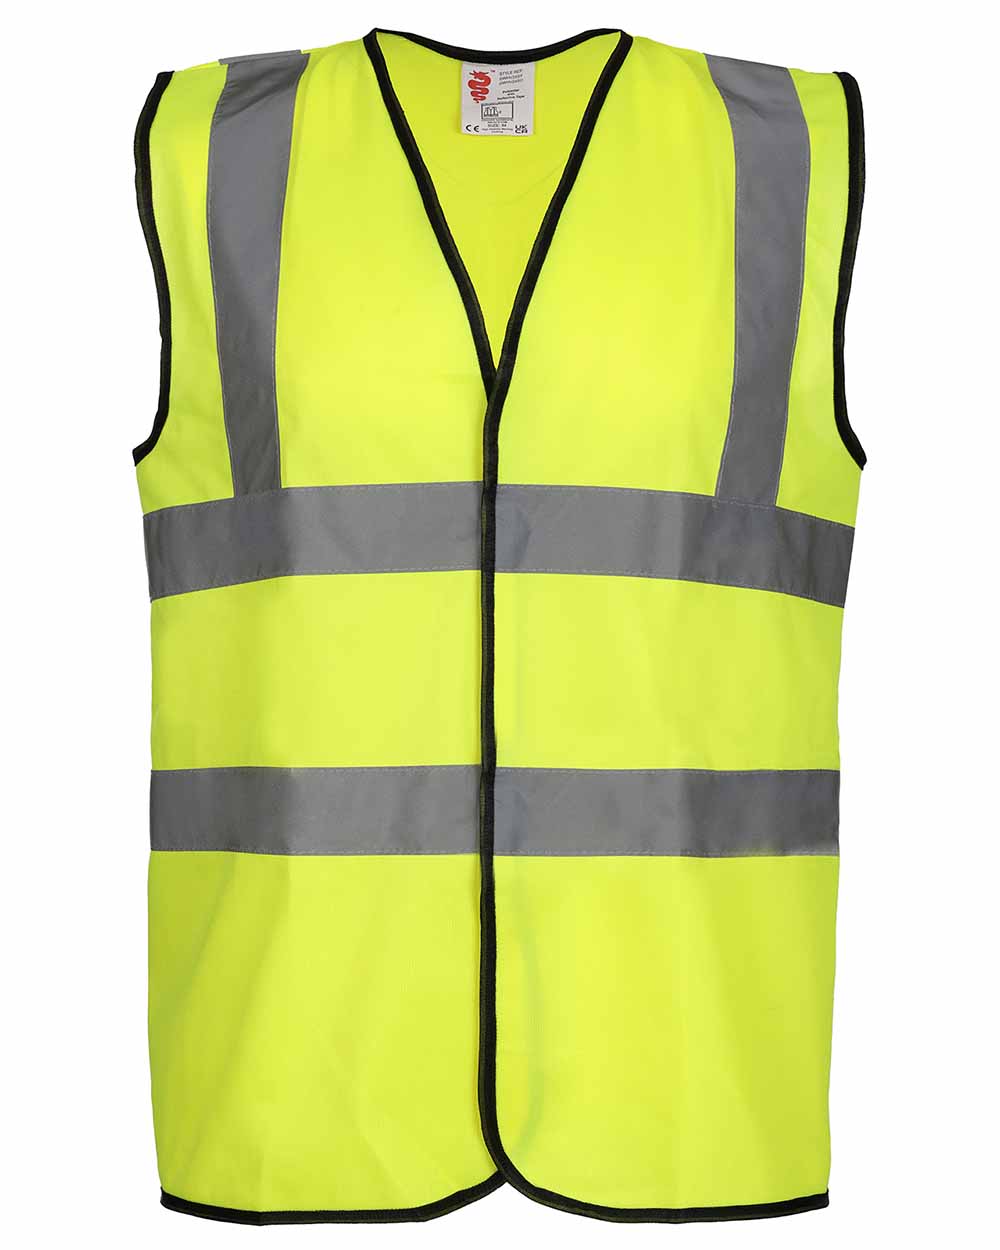 Yellow Fort Hi-Vis Vest with reflective strips 